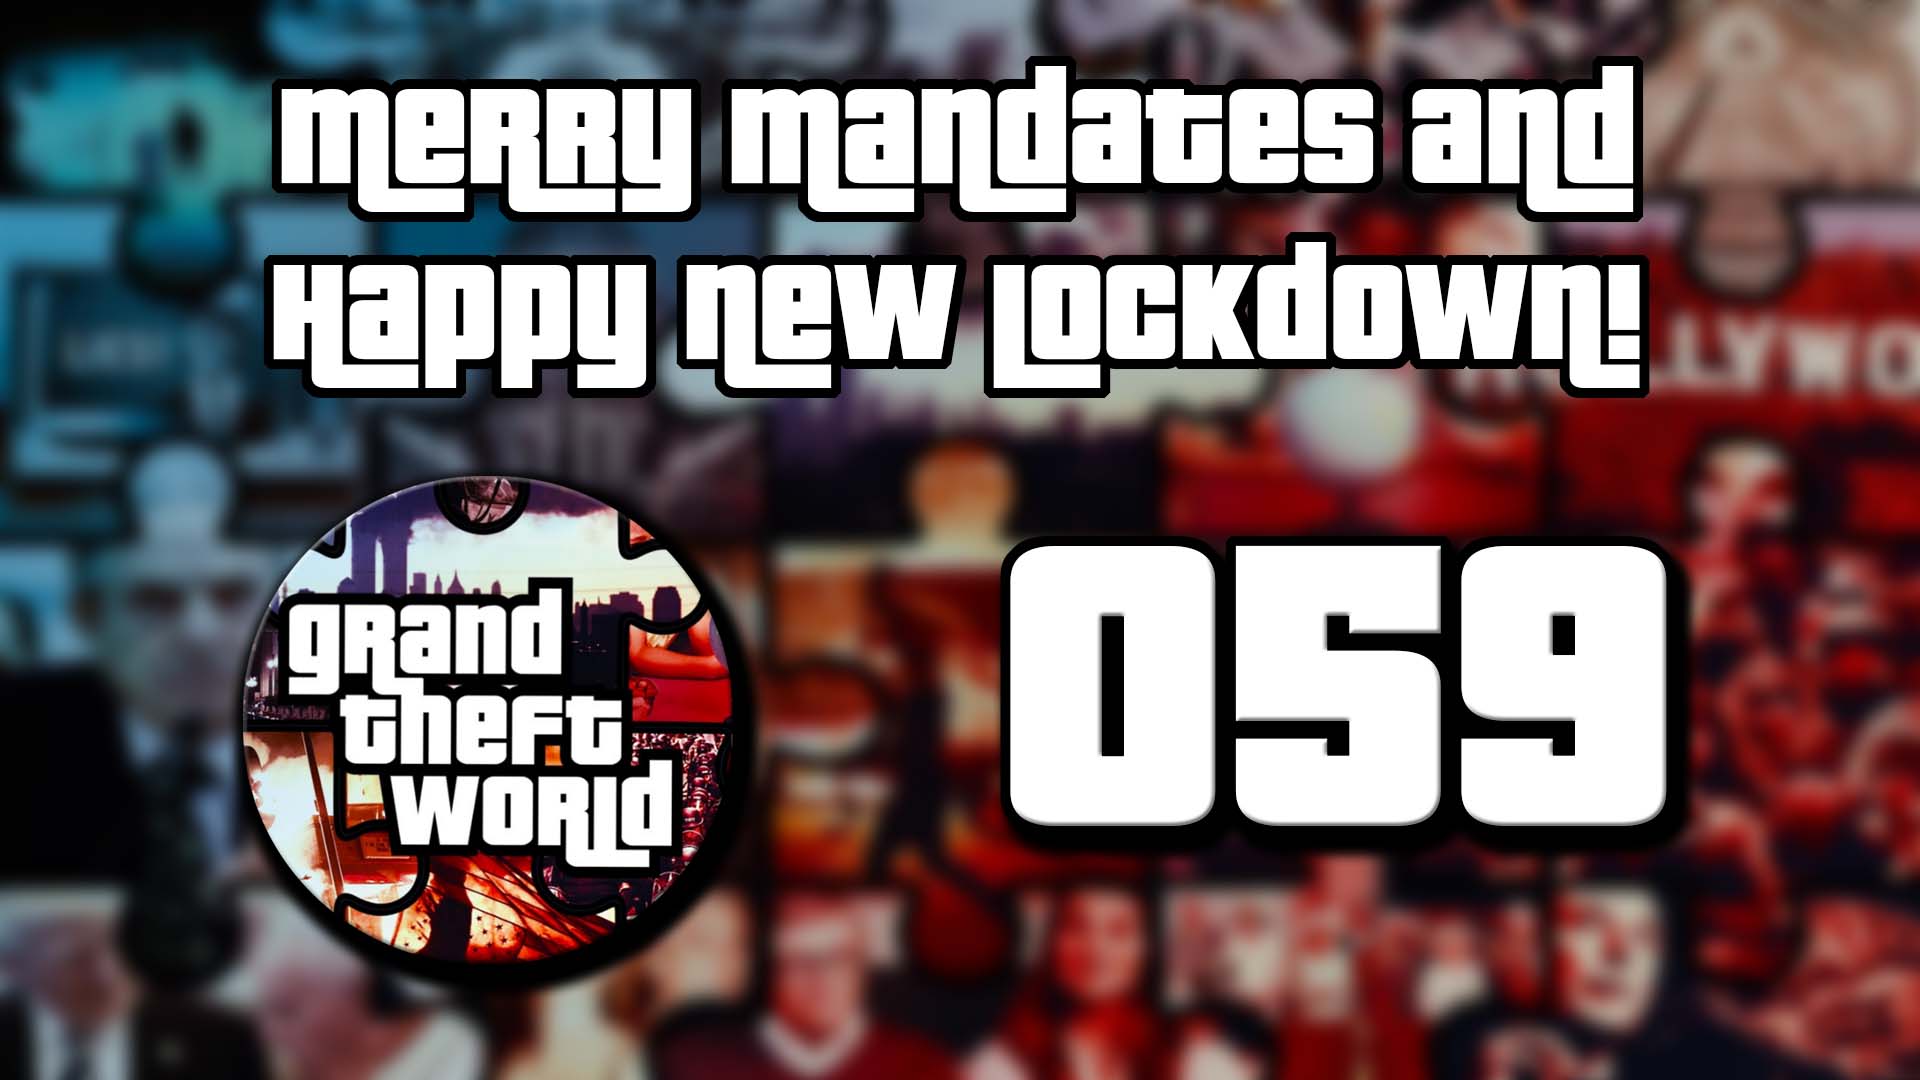 Grand Theft World Podcast 059 | Grand Theft World 059 | Merry Mandates and Happy New Lockdown!